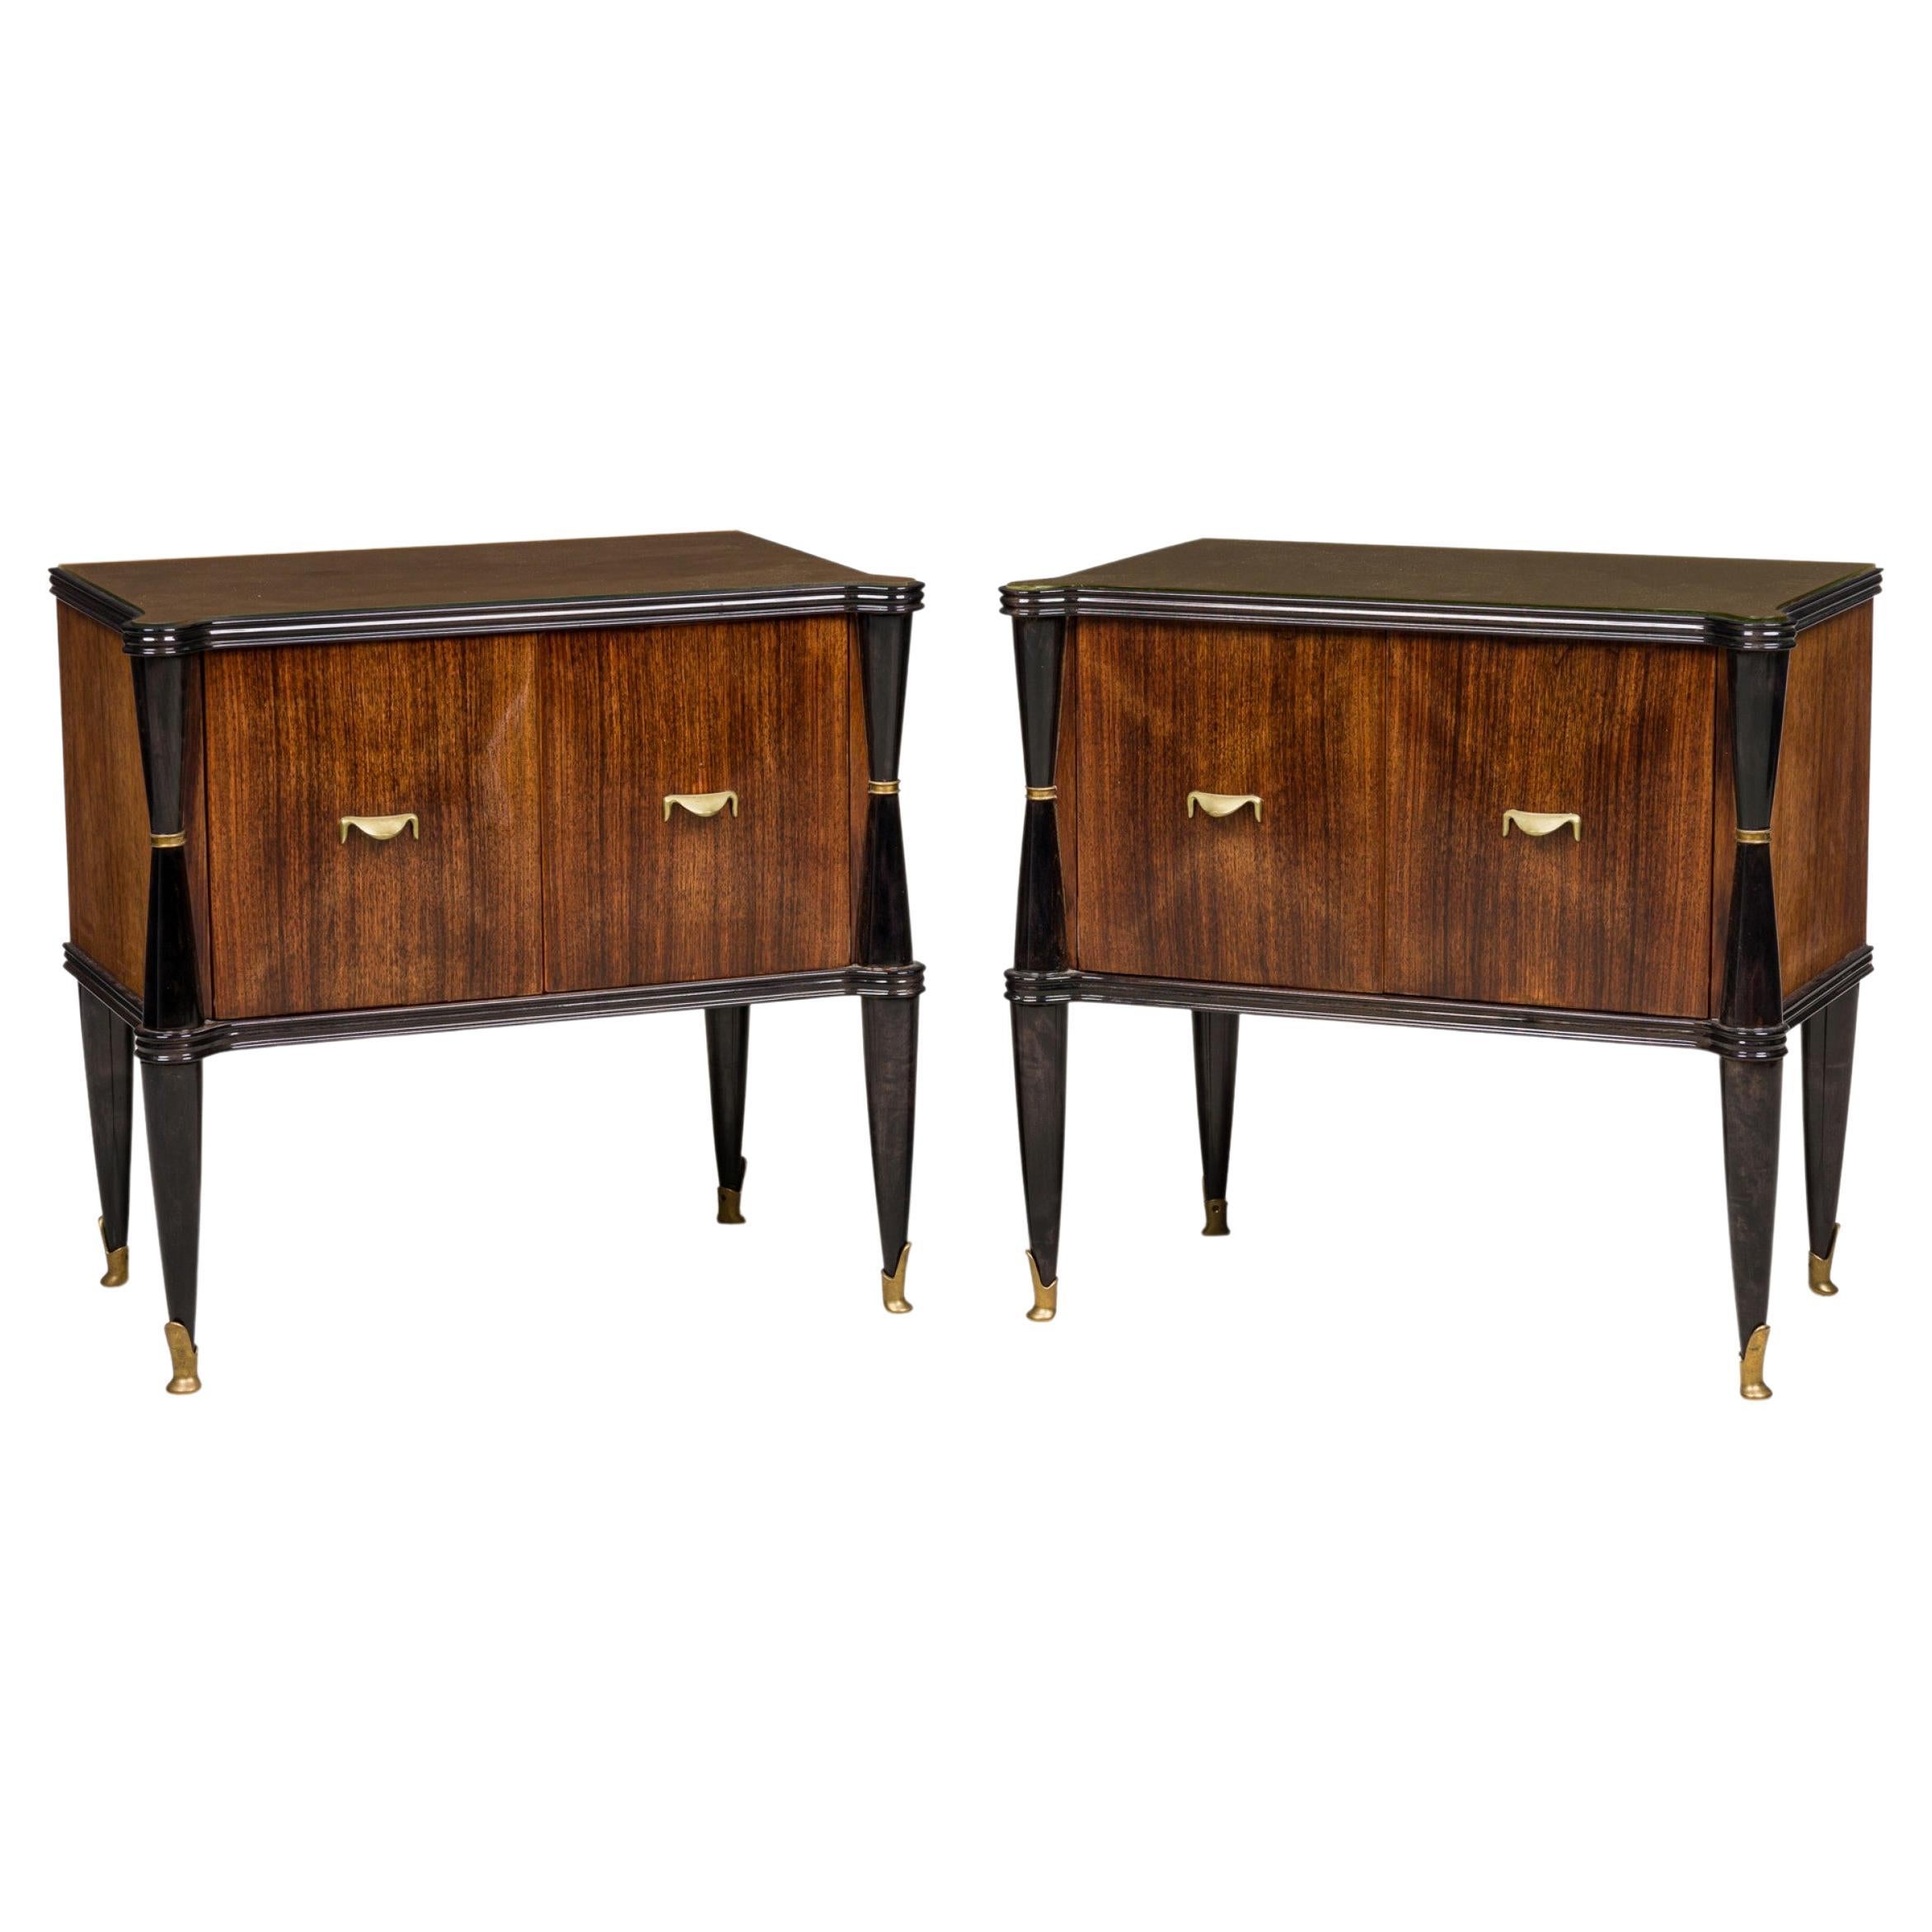 Pair of Art Deco French Commodes with Bronze and Ebonized Trim